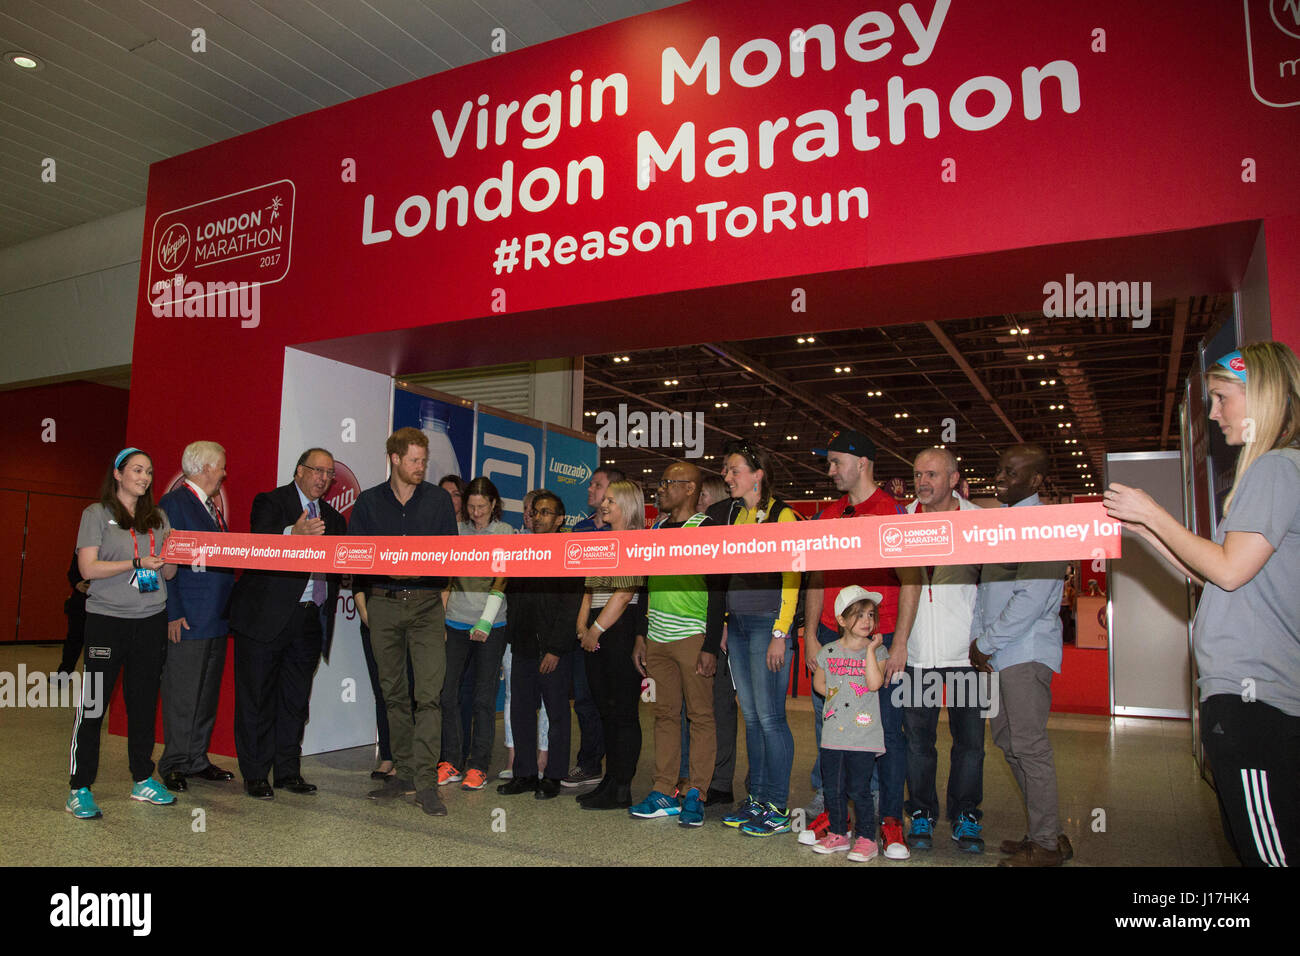 London, UK. 19th Apr, 2017. Prince Harry opens the 2017 Virgin Money London Marathon Expo at ExCeL London where thousands of runners will register over the following four days for this Sunday's 37th edition of the race. Prince Harry is Patron of the London Marathon Charitable Trust and, together with The Duke and Duchess of Cambridge, is spearheading the Heads Together campaign to end the stigma around mental health and start a national conversation on mental wellbeing for everyone. Credit: Vibrant Pictures/Alamy Live News Stock Photo